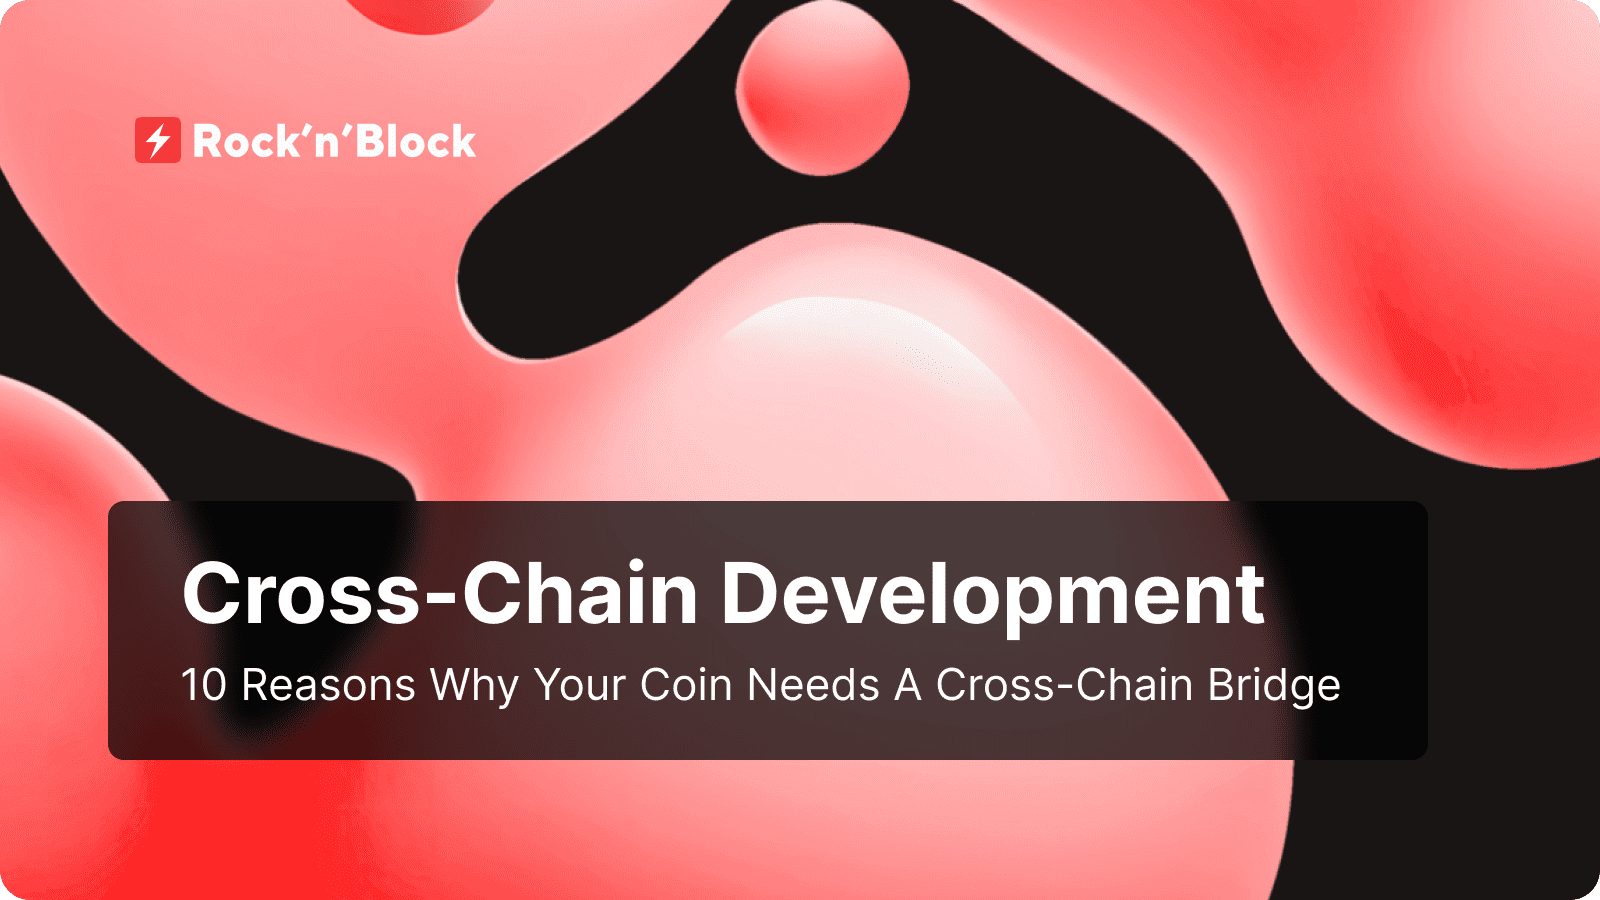 Rocknblock blog: 10 Reasons Why Your Coin Needs a Cross-Chain Bridge